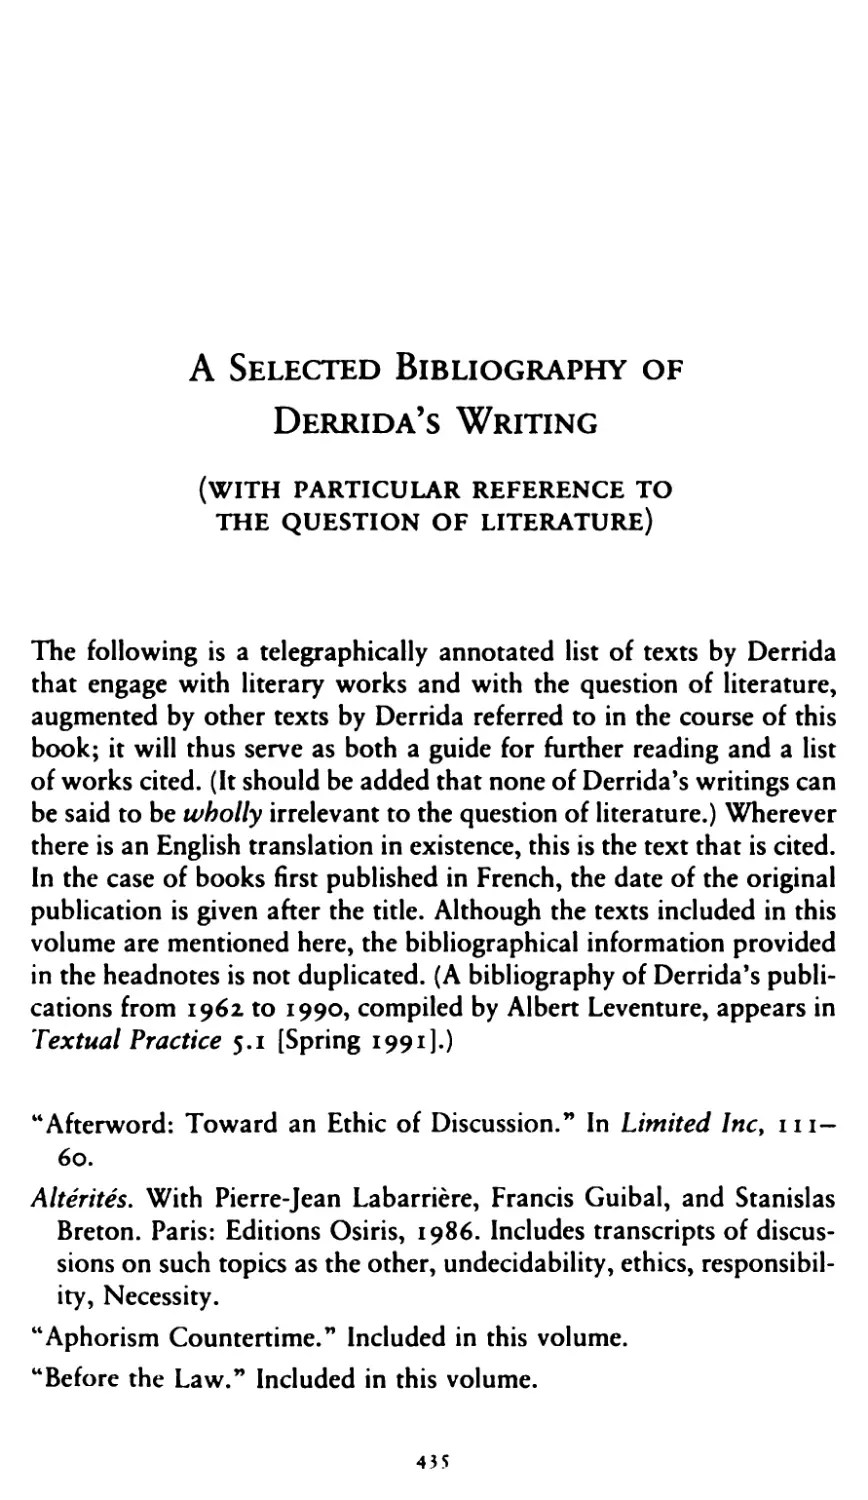 A Selected Bibliography of Derrida's Writing